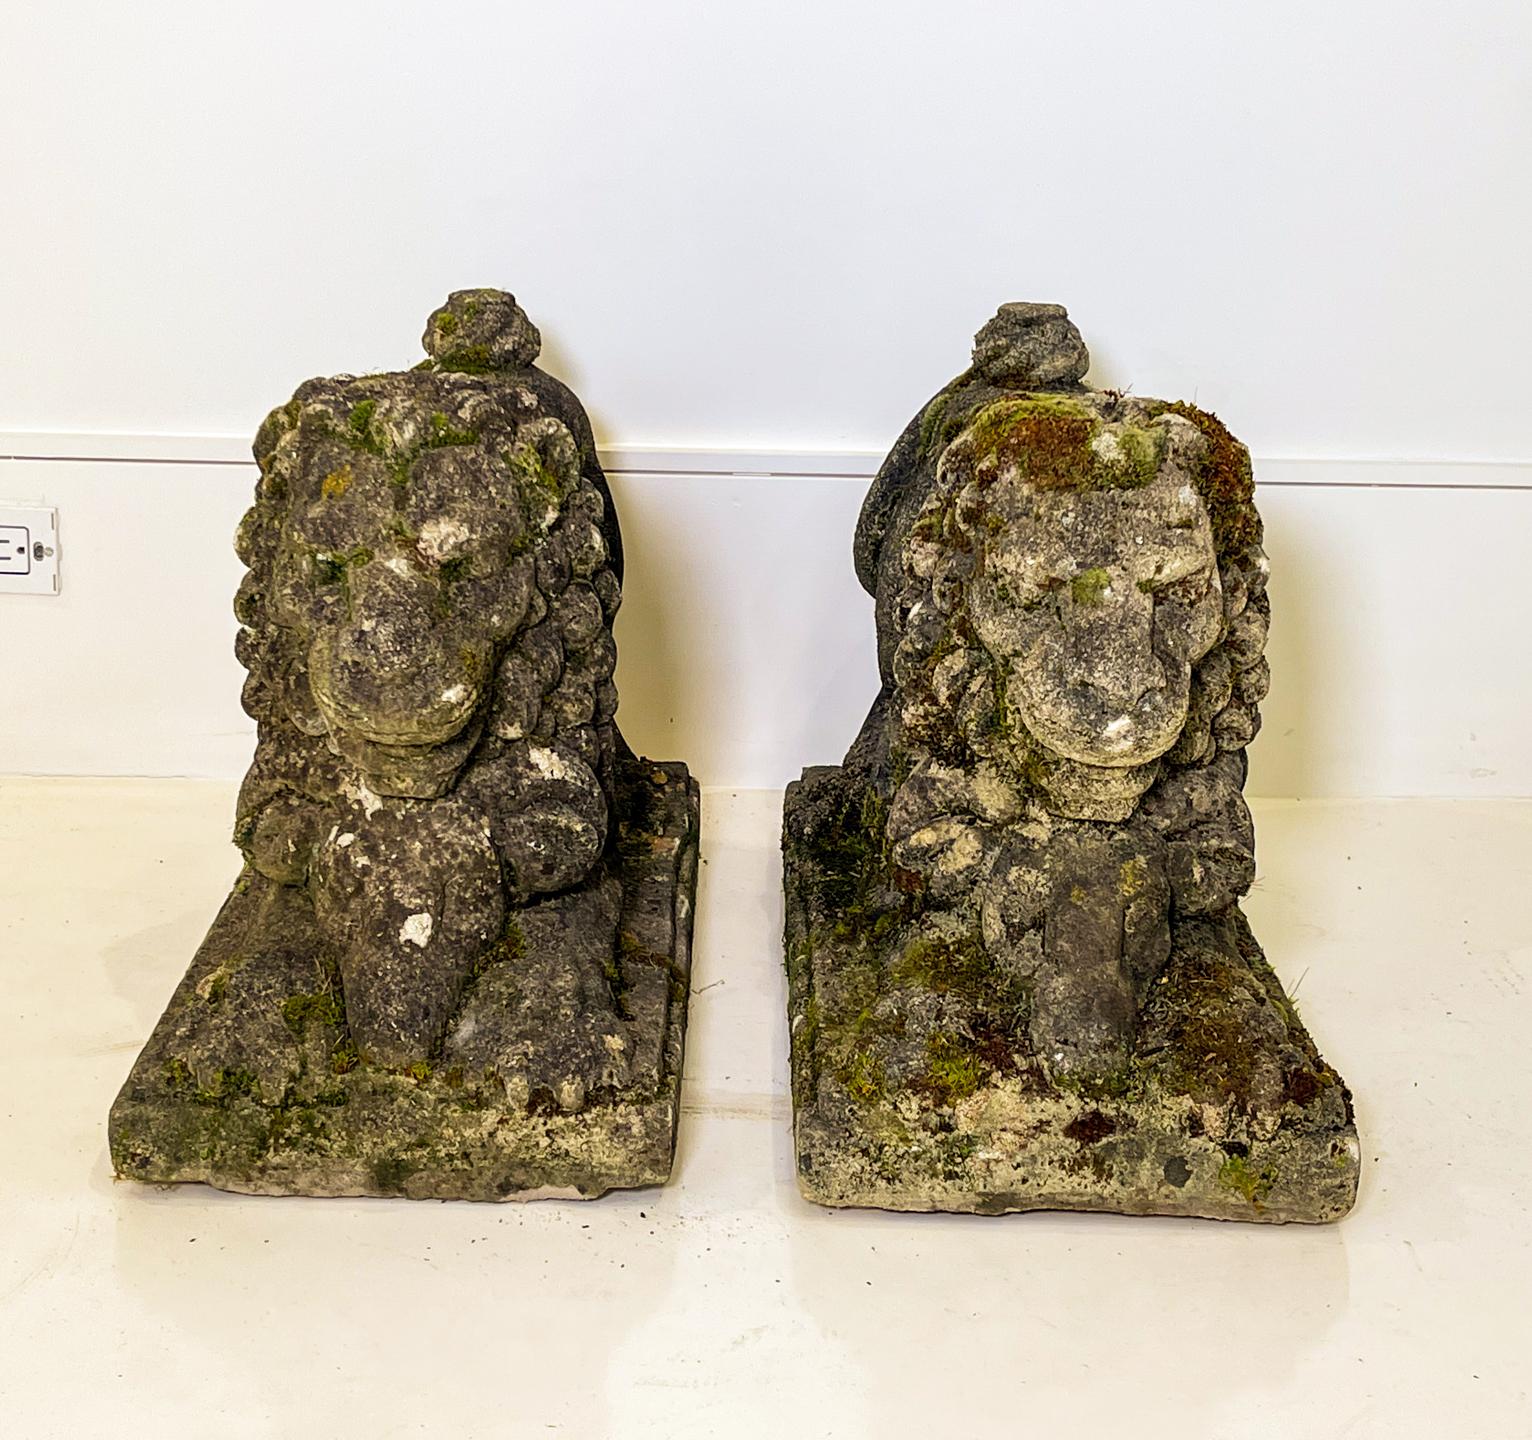 Two lions poised to leap. These solid concrete garden ornaments are very well aged and patinated. They would be beautiful indoors as well as out.